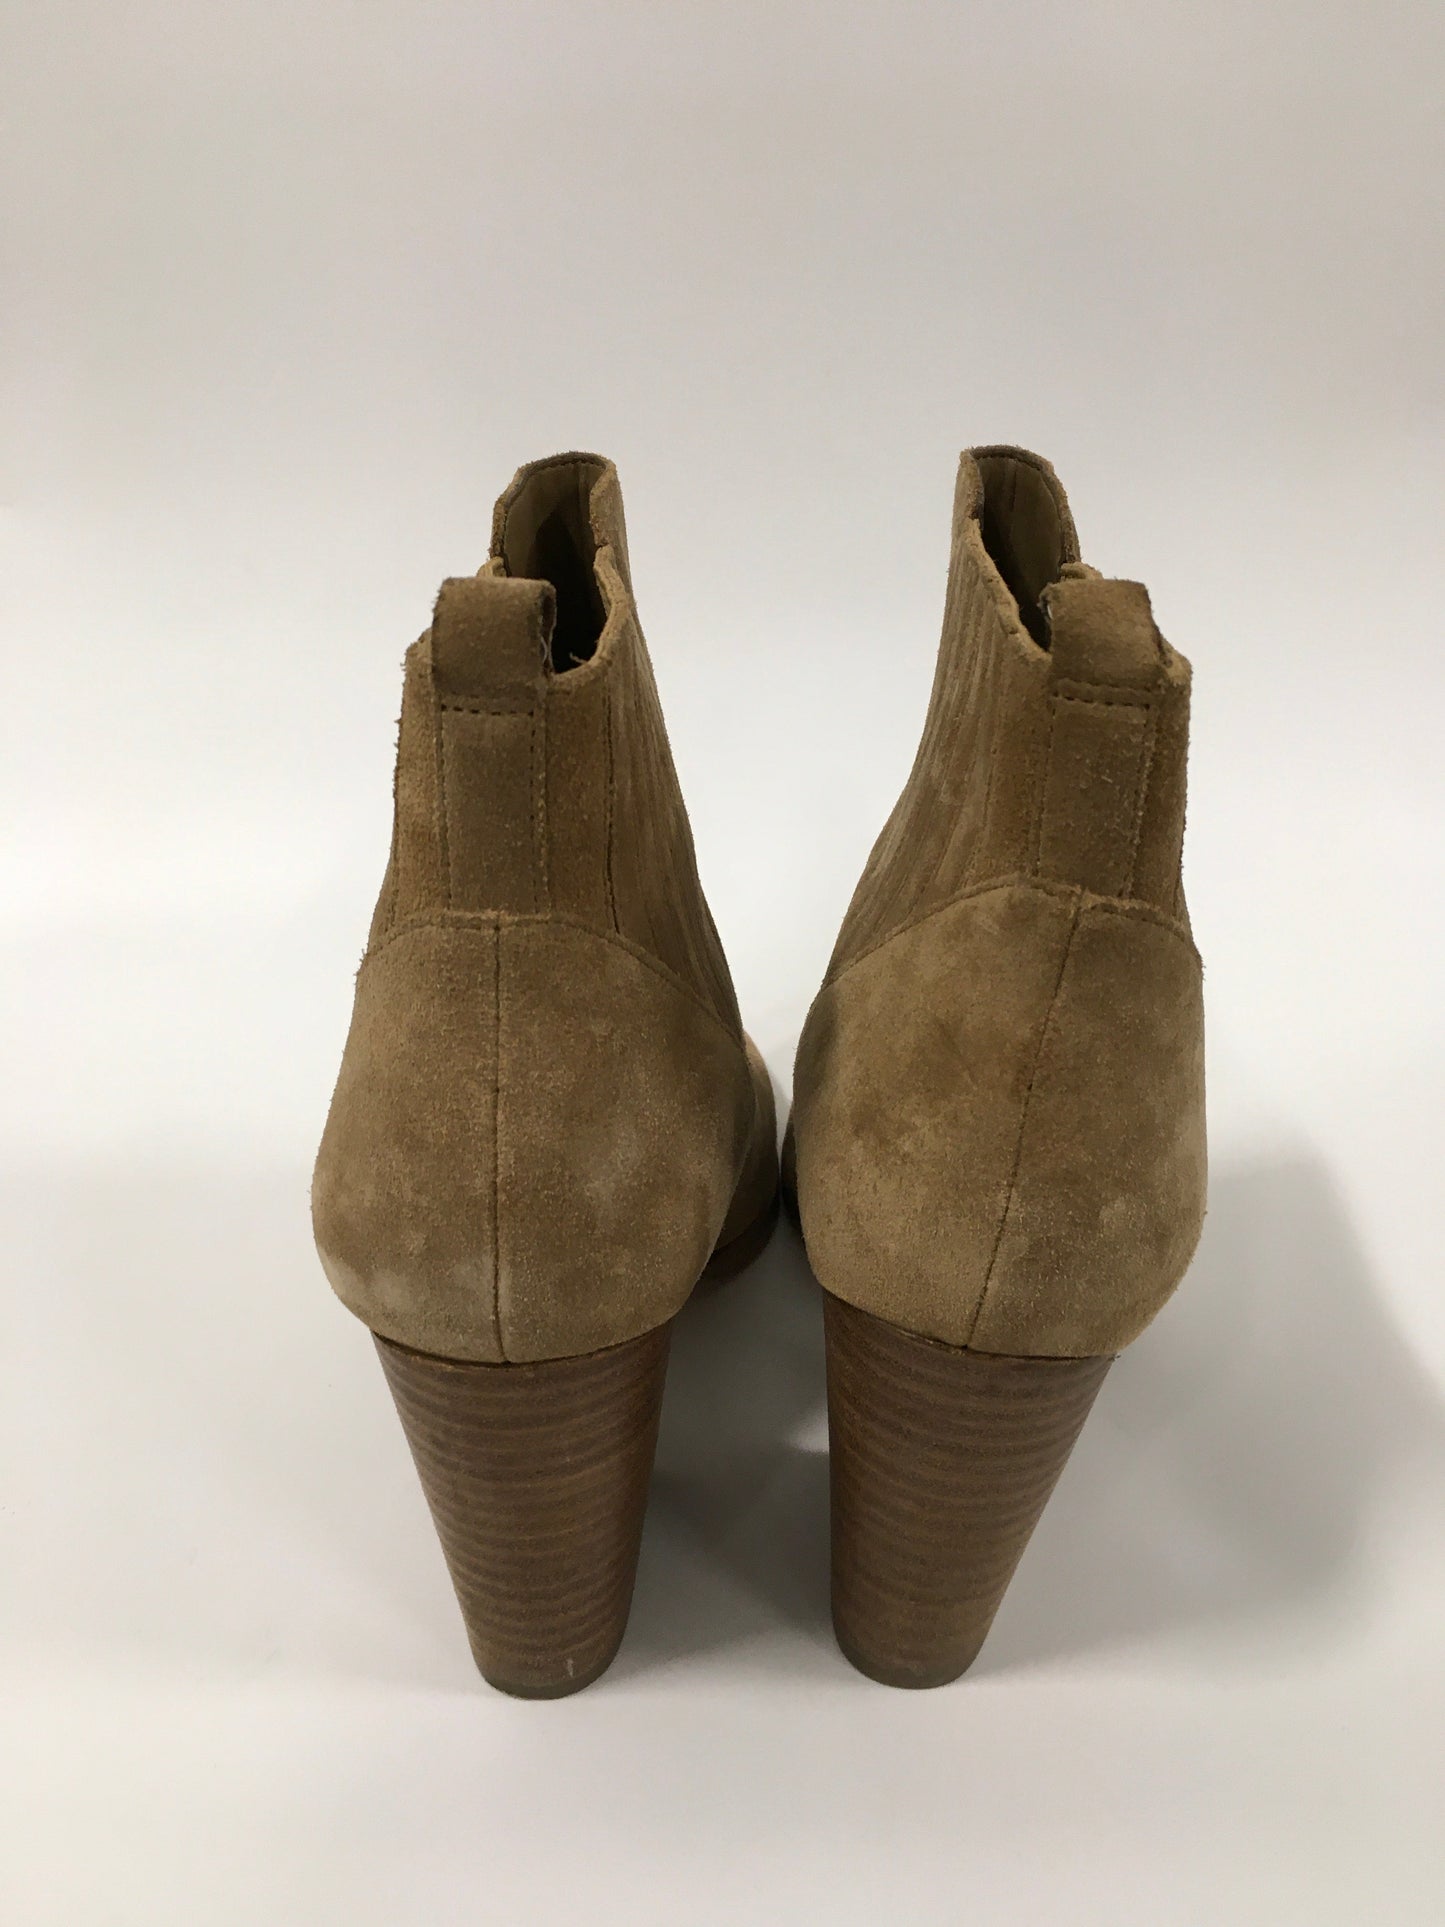 Tan Boots Ankle Heels Marc Fisher, Size 9.5